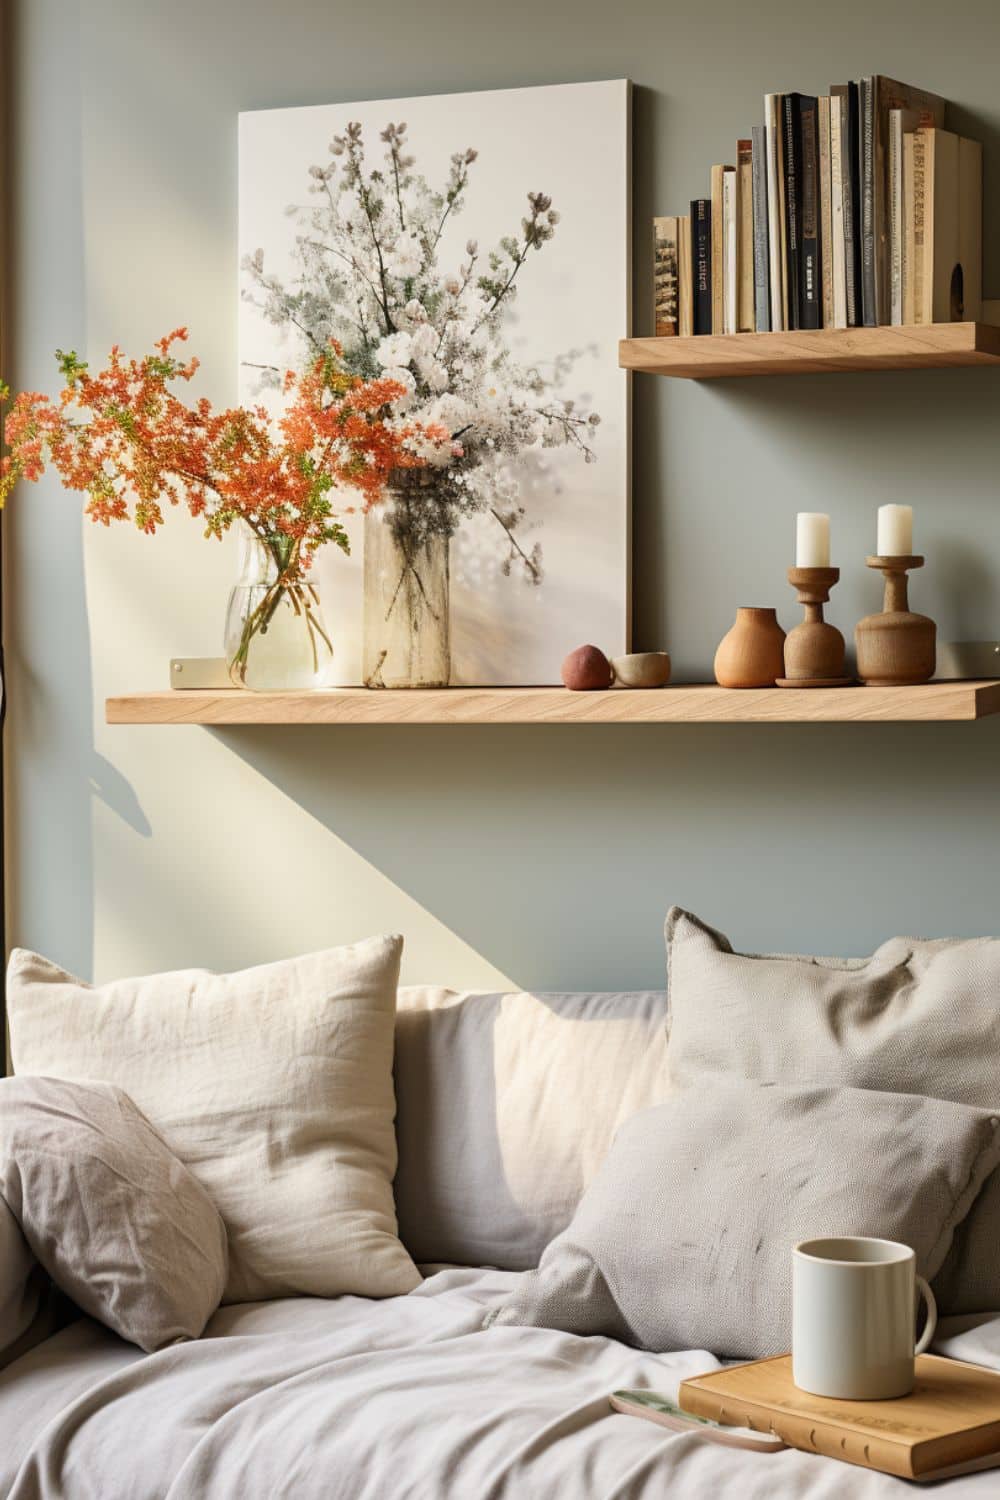 Make sure your seasonal spruce-up includes DIY custom wooden shelves mounted on a wall displaying books and decorative items